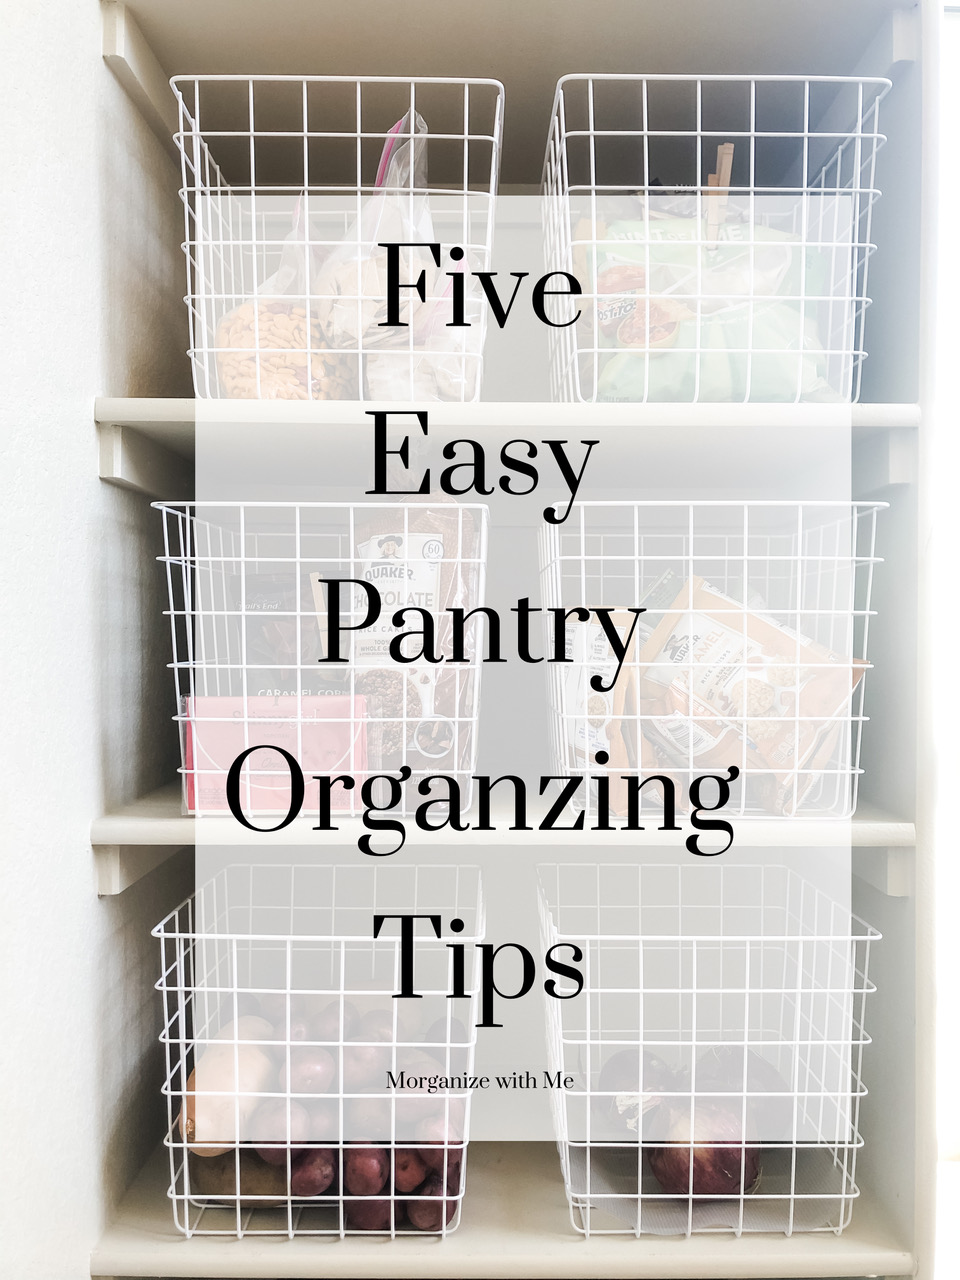 Five Easy Pantry Organizing Tips for a Pantry of Any Size at I'm an Organizing Junkie blog